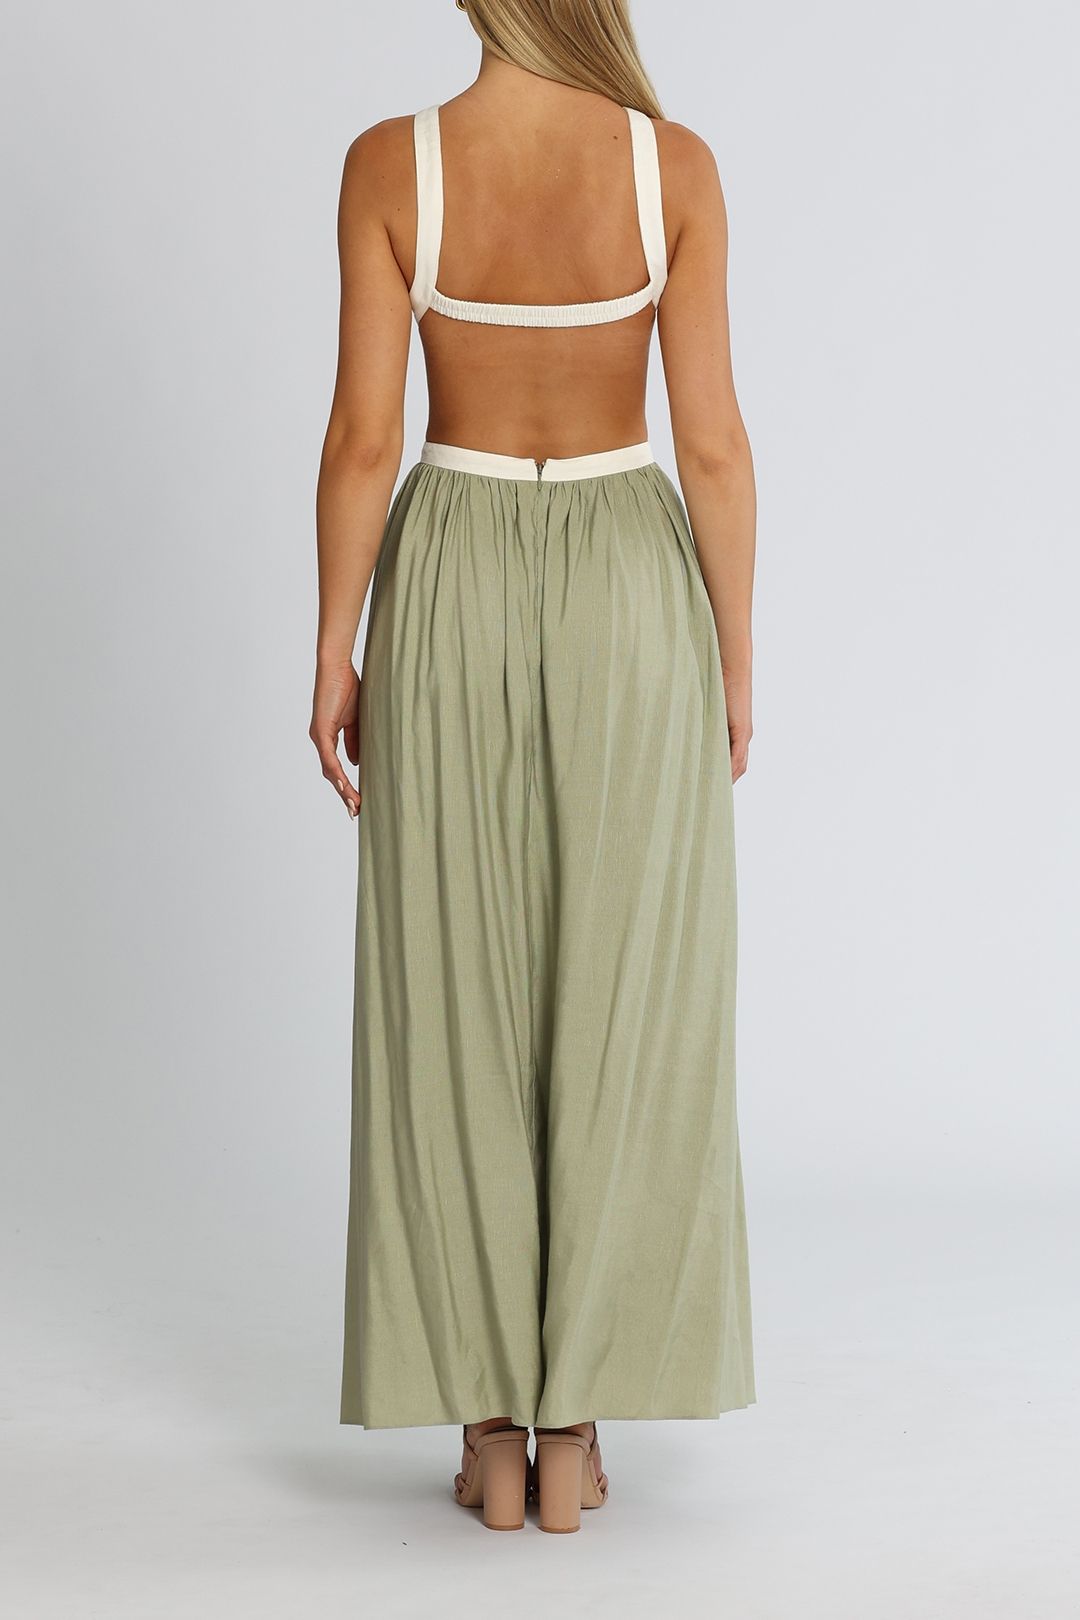 Significant Other Marino Dress Sage Backless